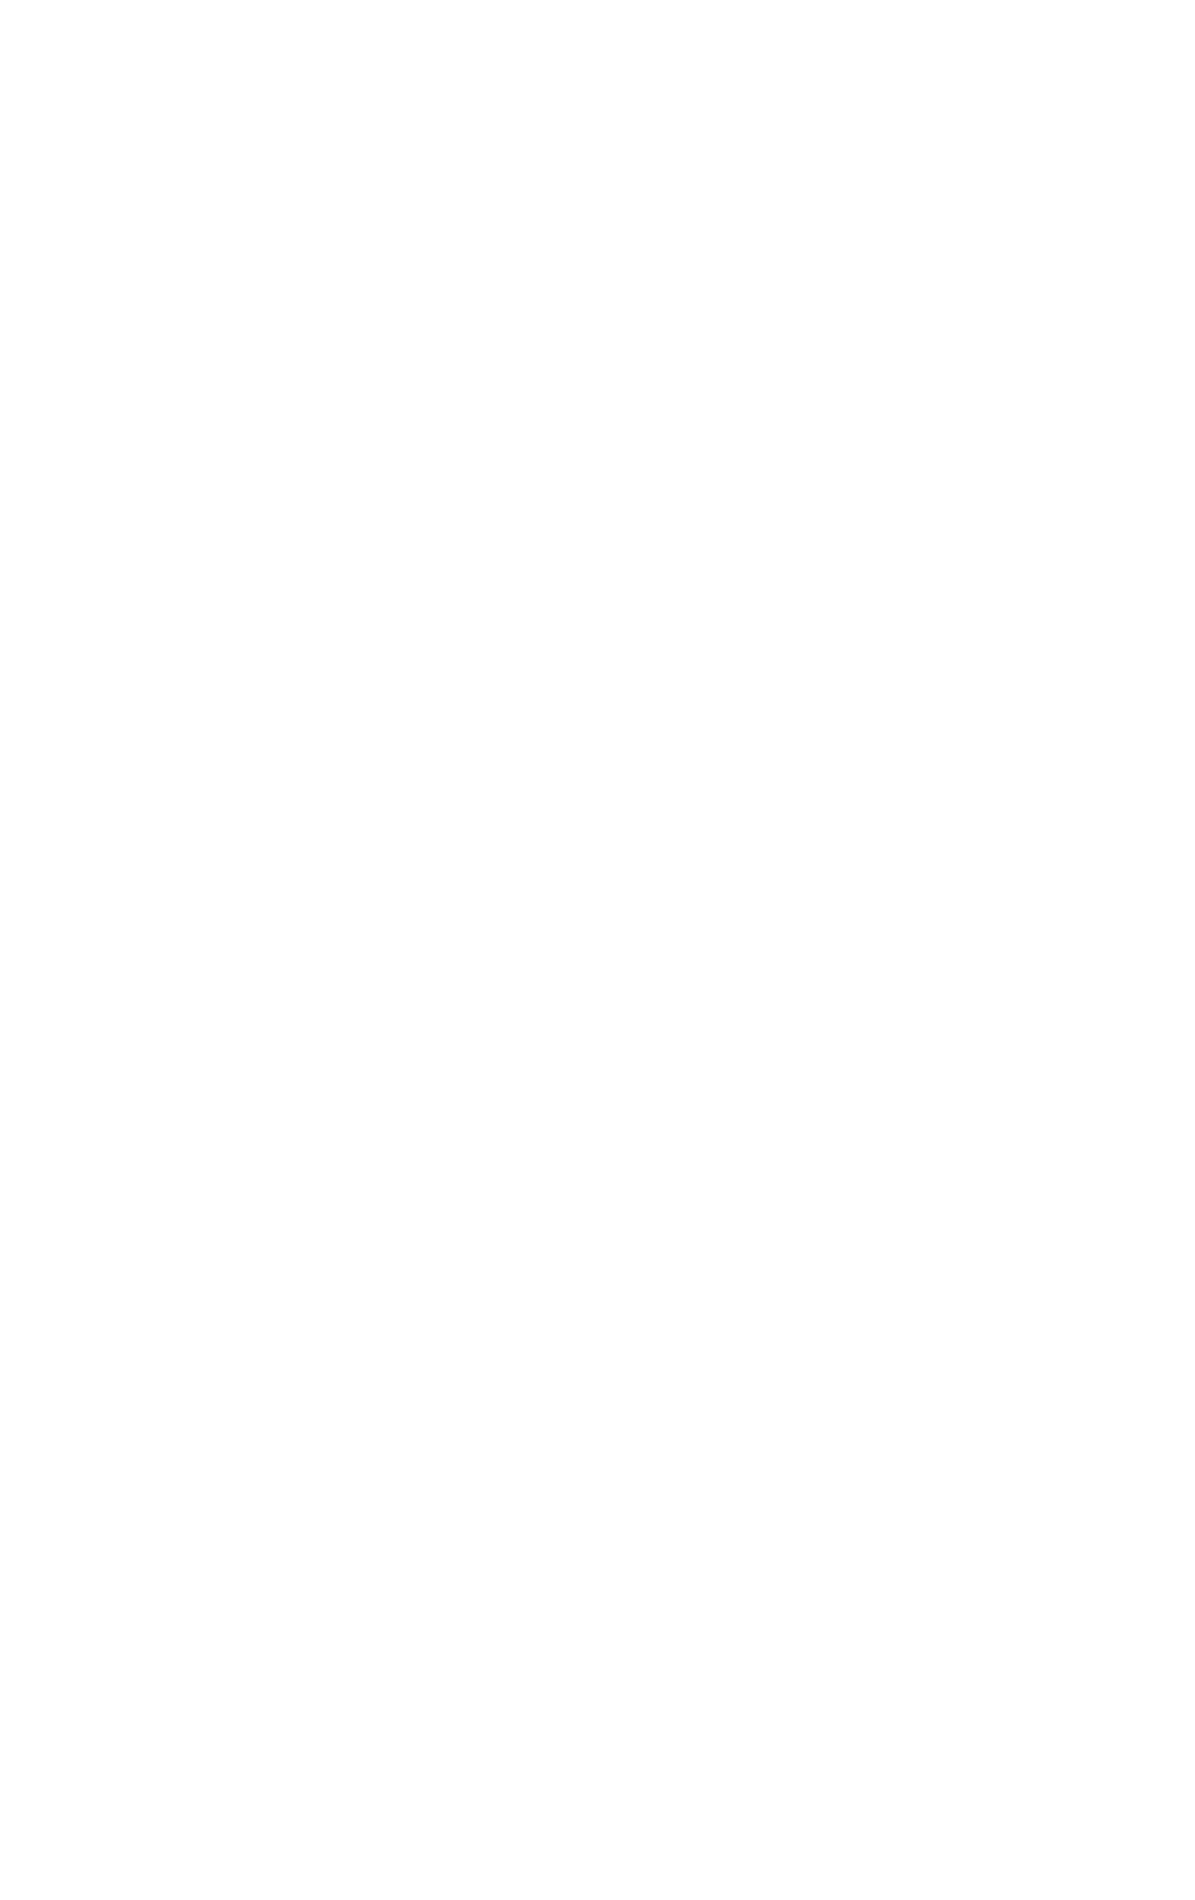 Unmatched balancing solution